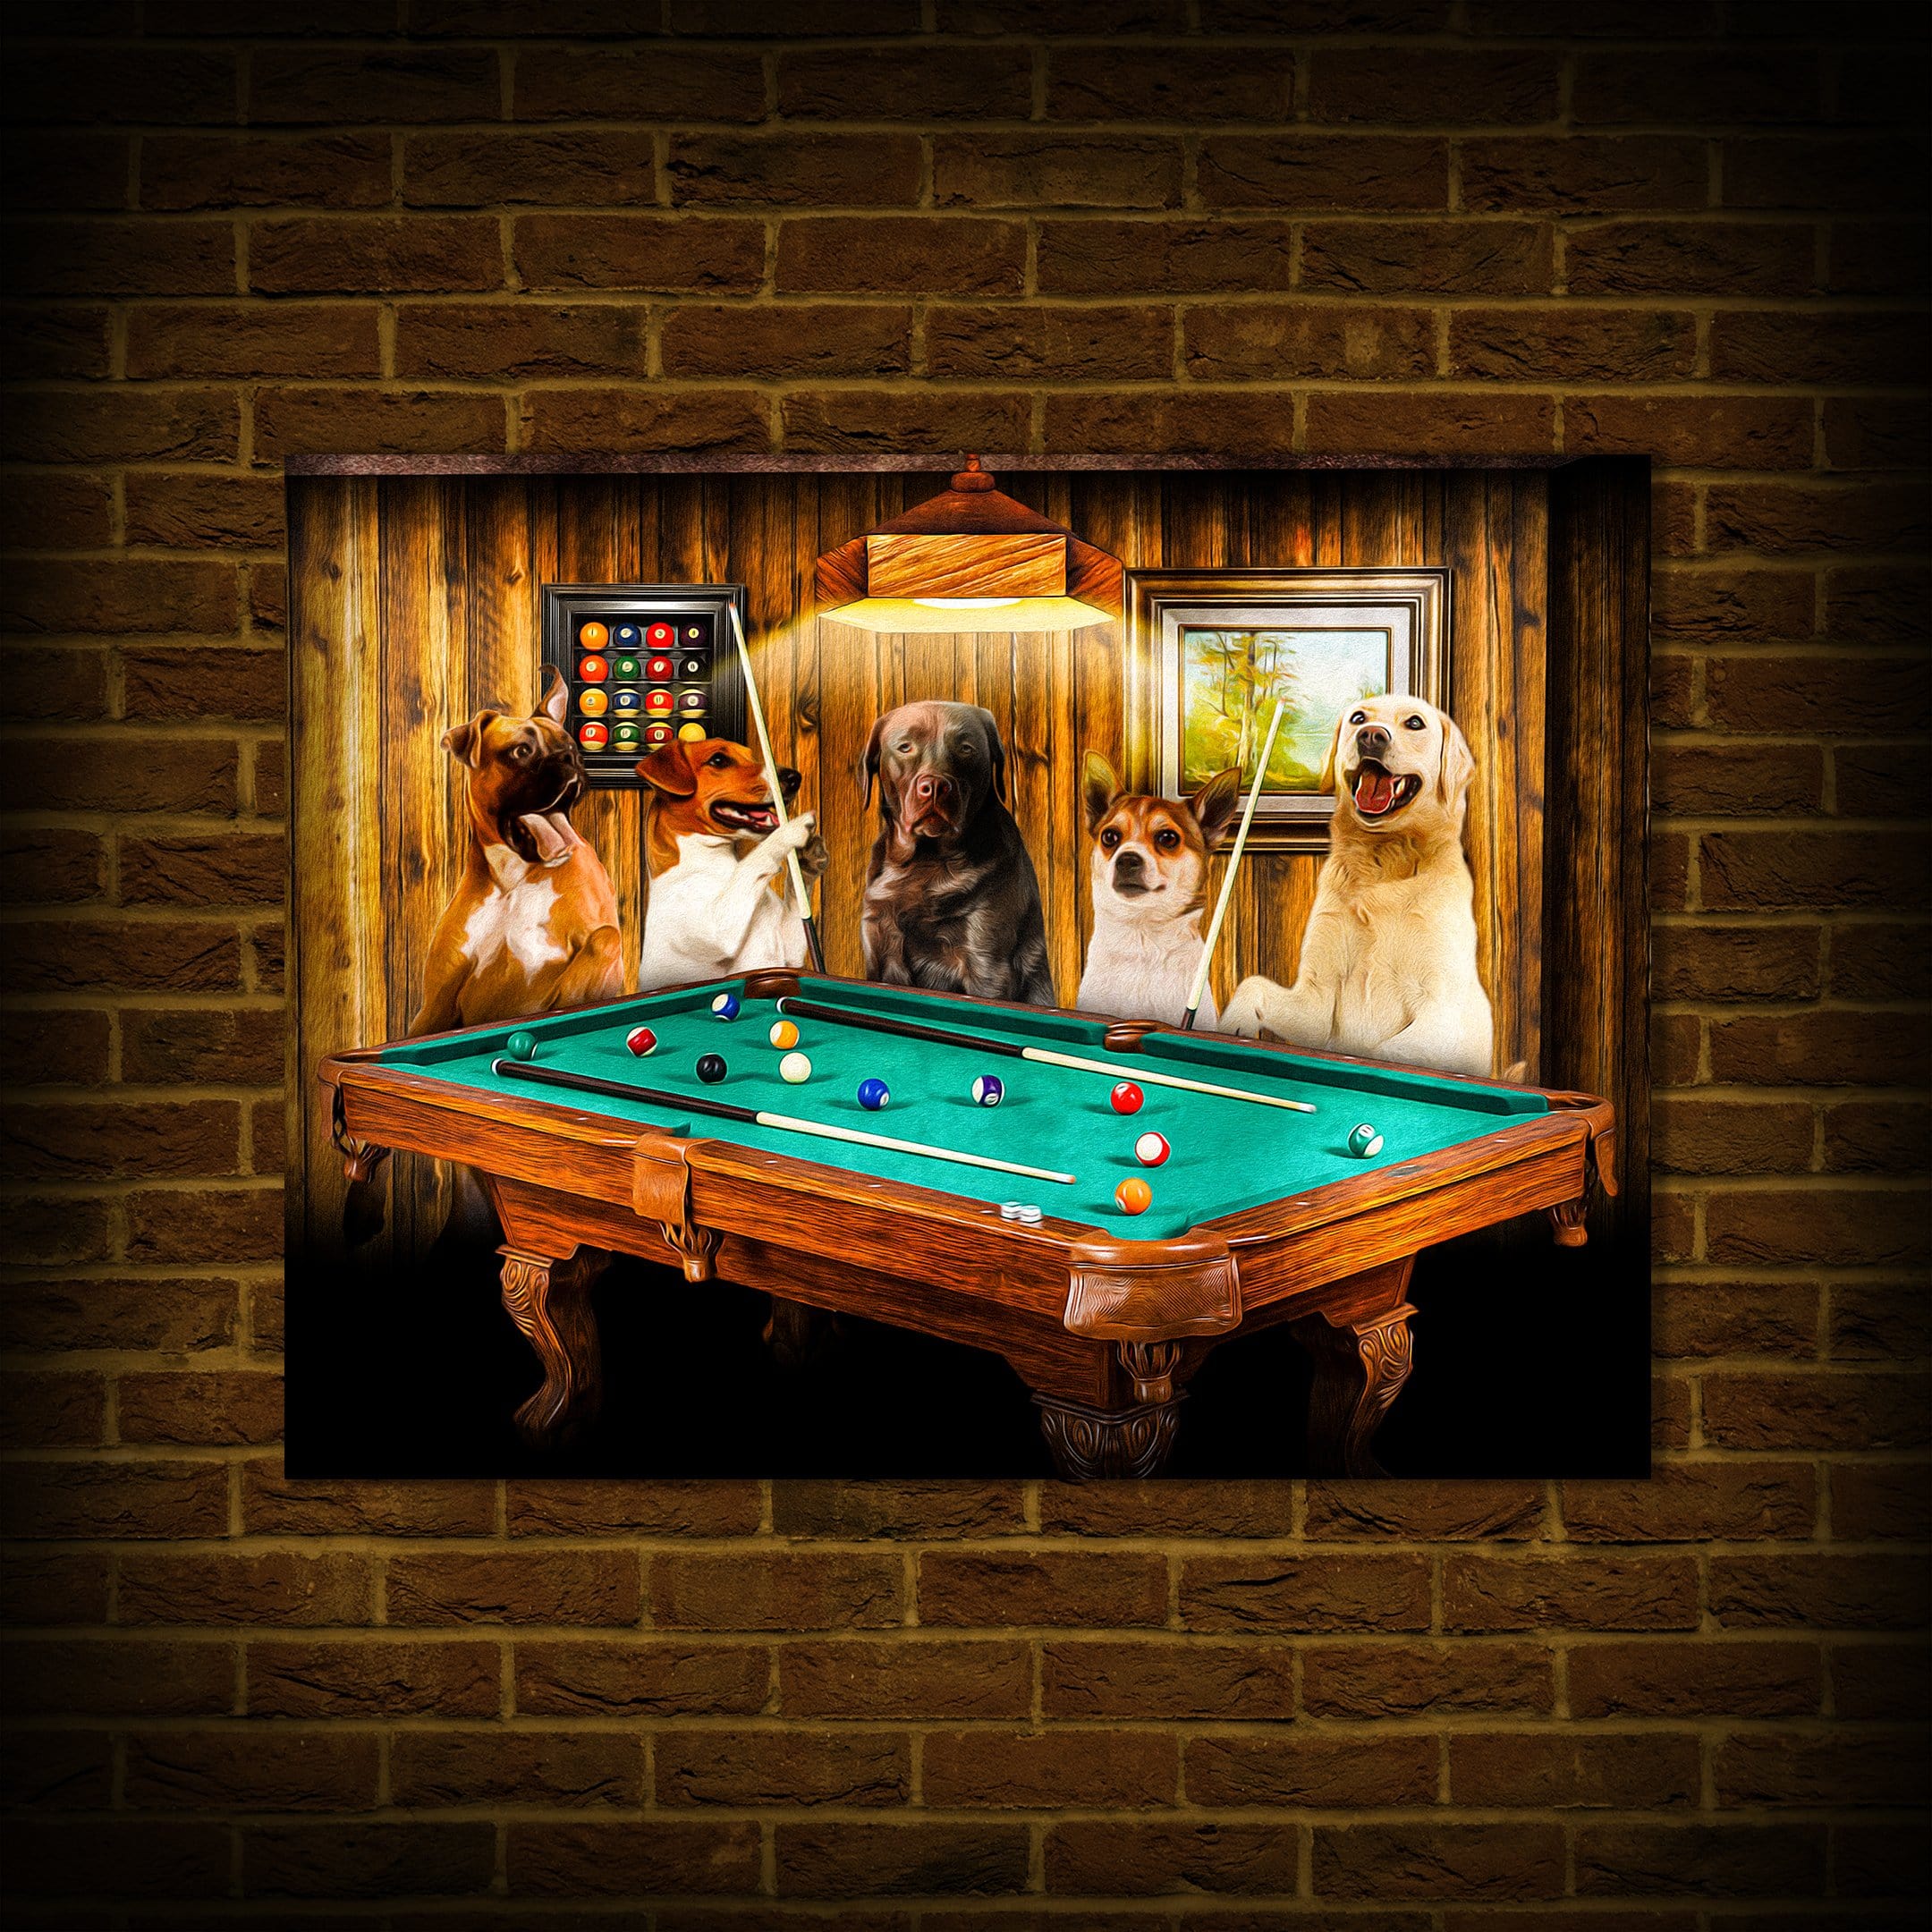 &#39;The Pool Players&#39; Personalized 5 Pet Poster